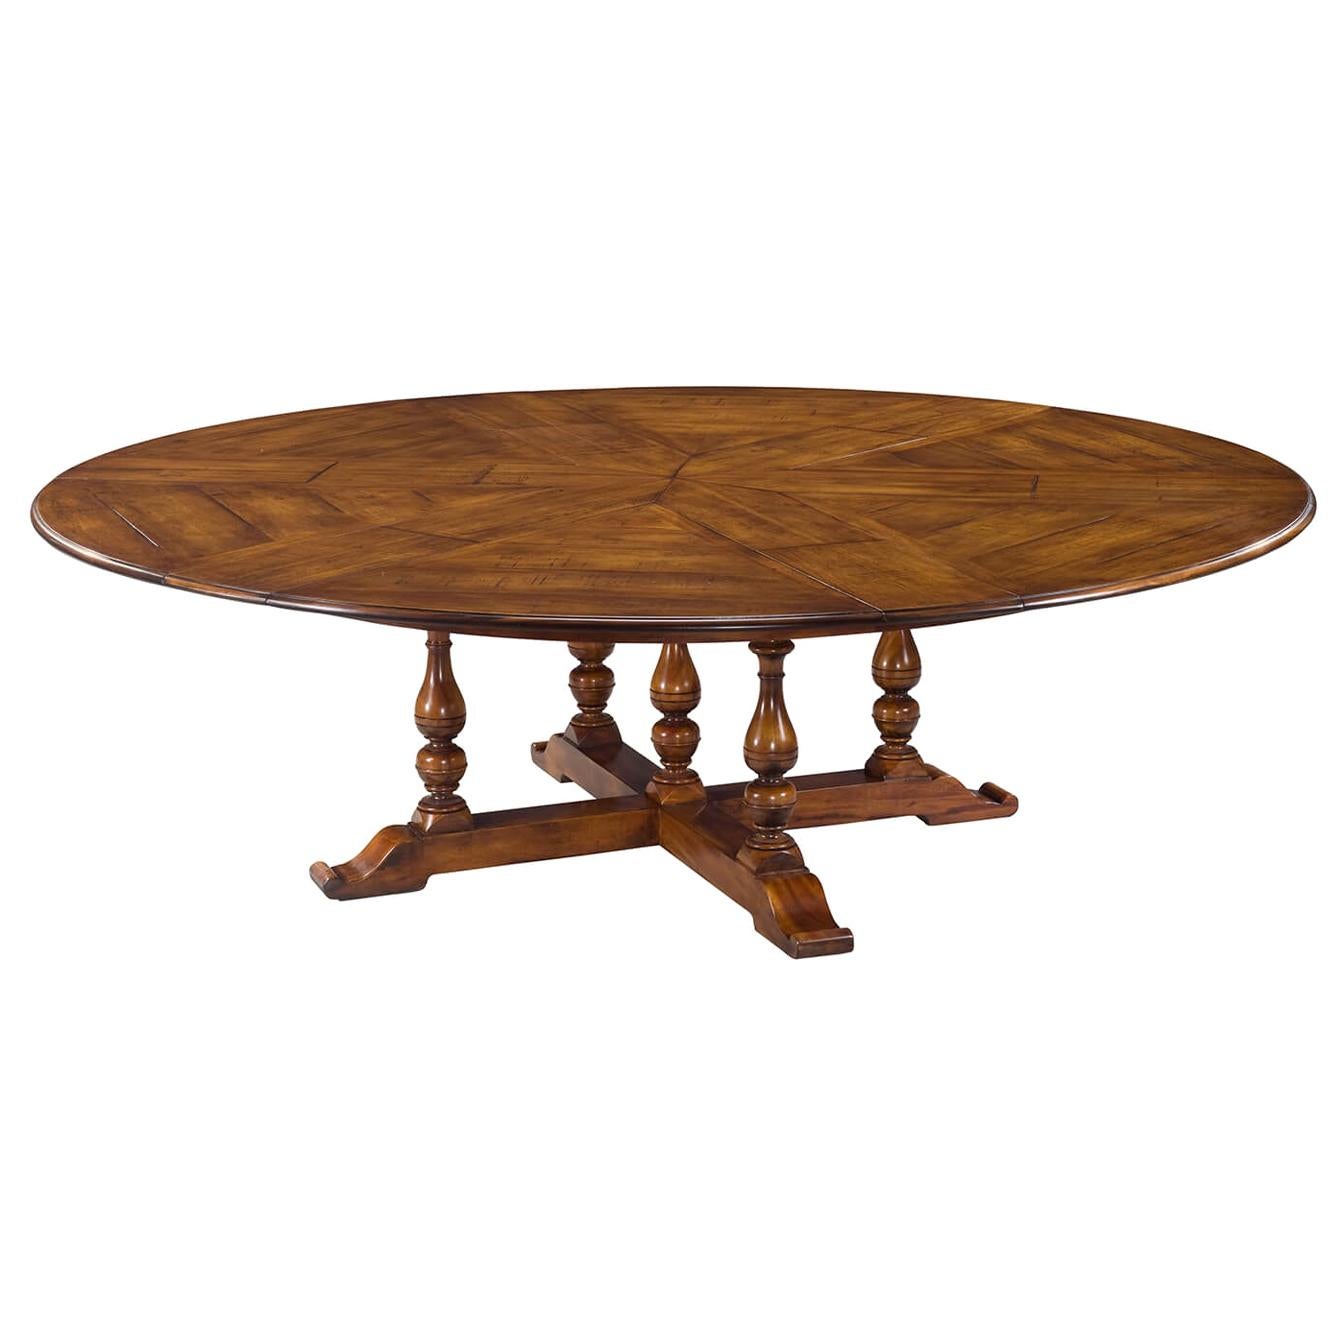 Early English Style Round Extension Dining Table For Sale